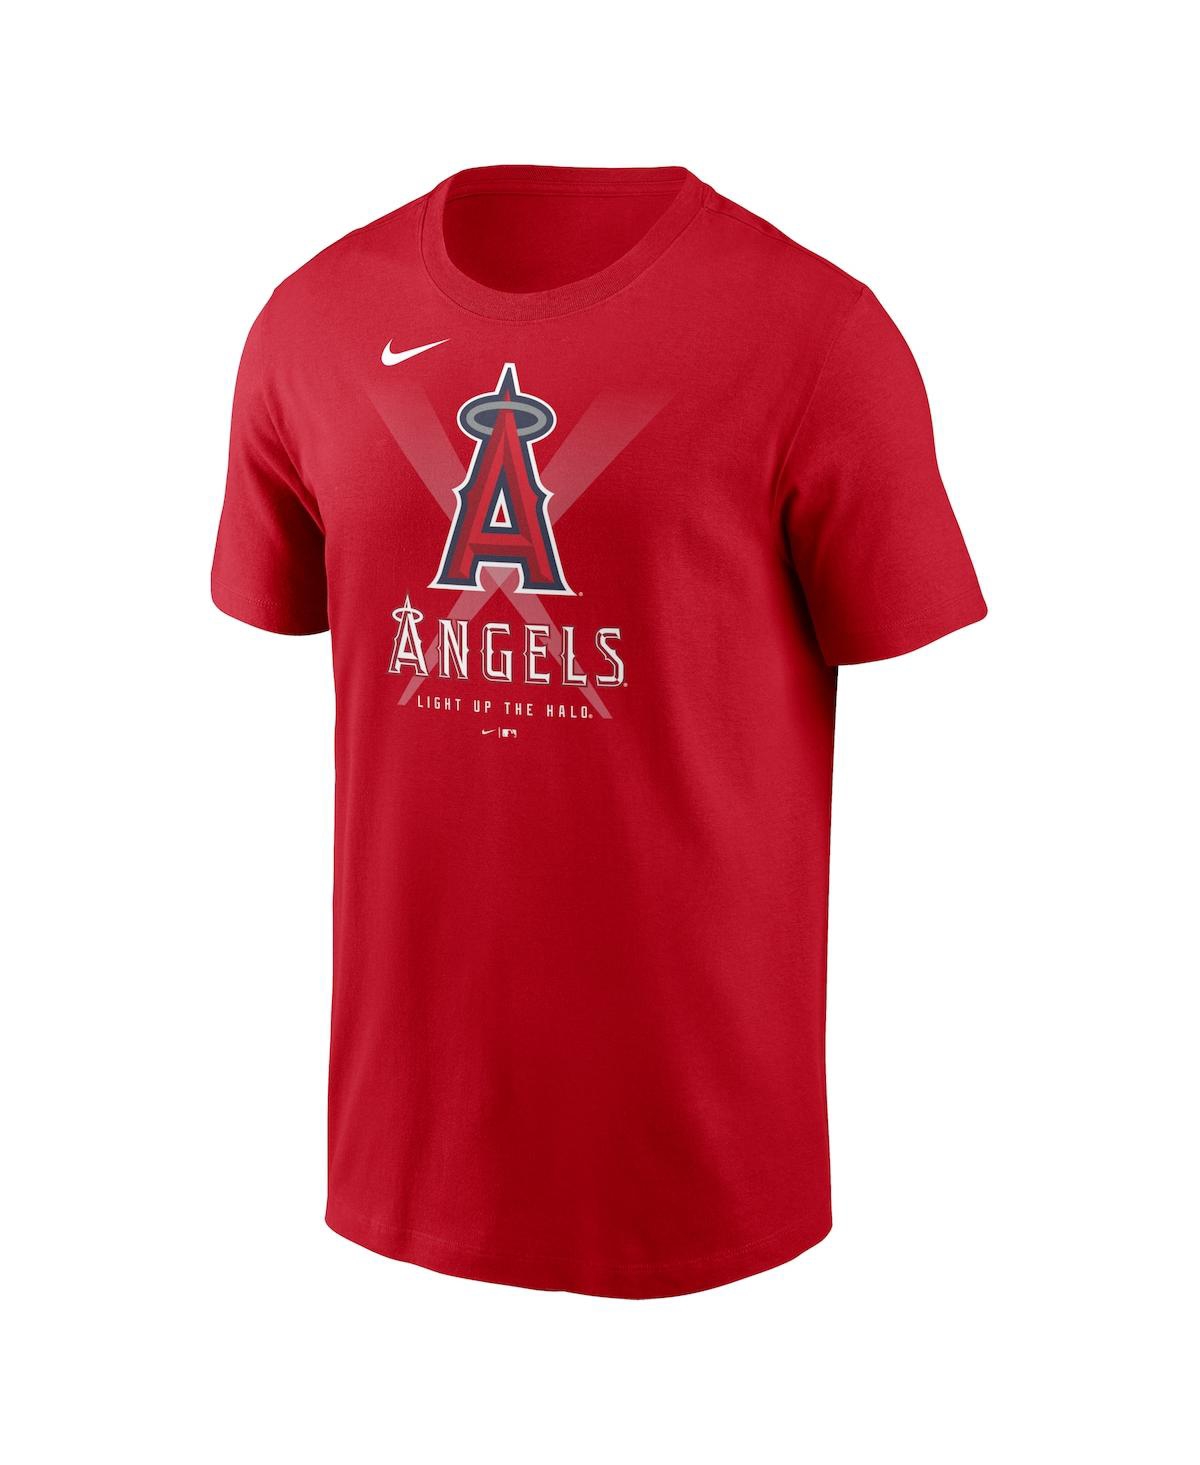 Shop Nike Men's  Red Los Angeles Angels Light Up The Halo Local Team T-shirt